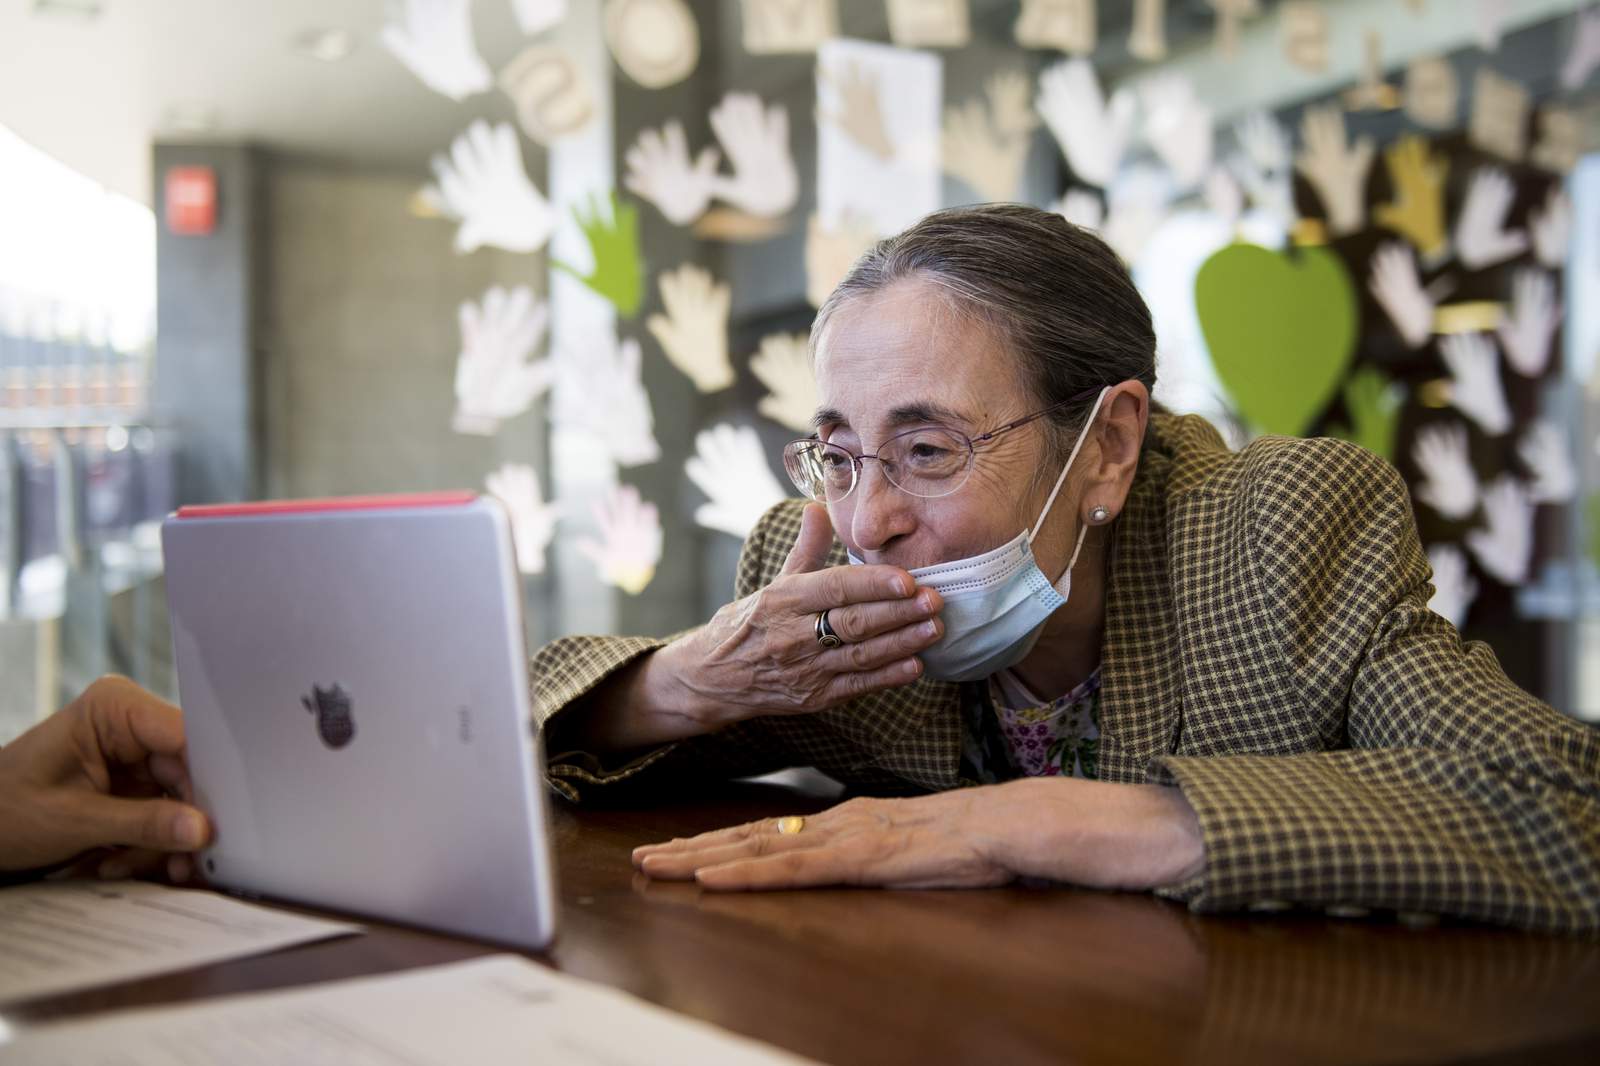 U-M poll: Loneliness among older adults doubled in early months of pandemic